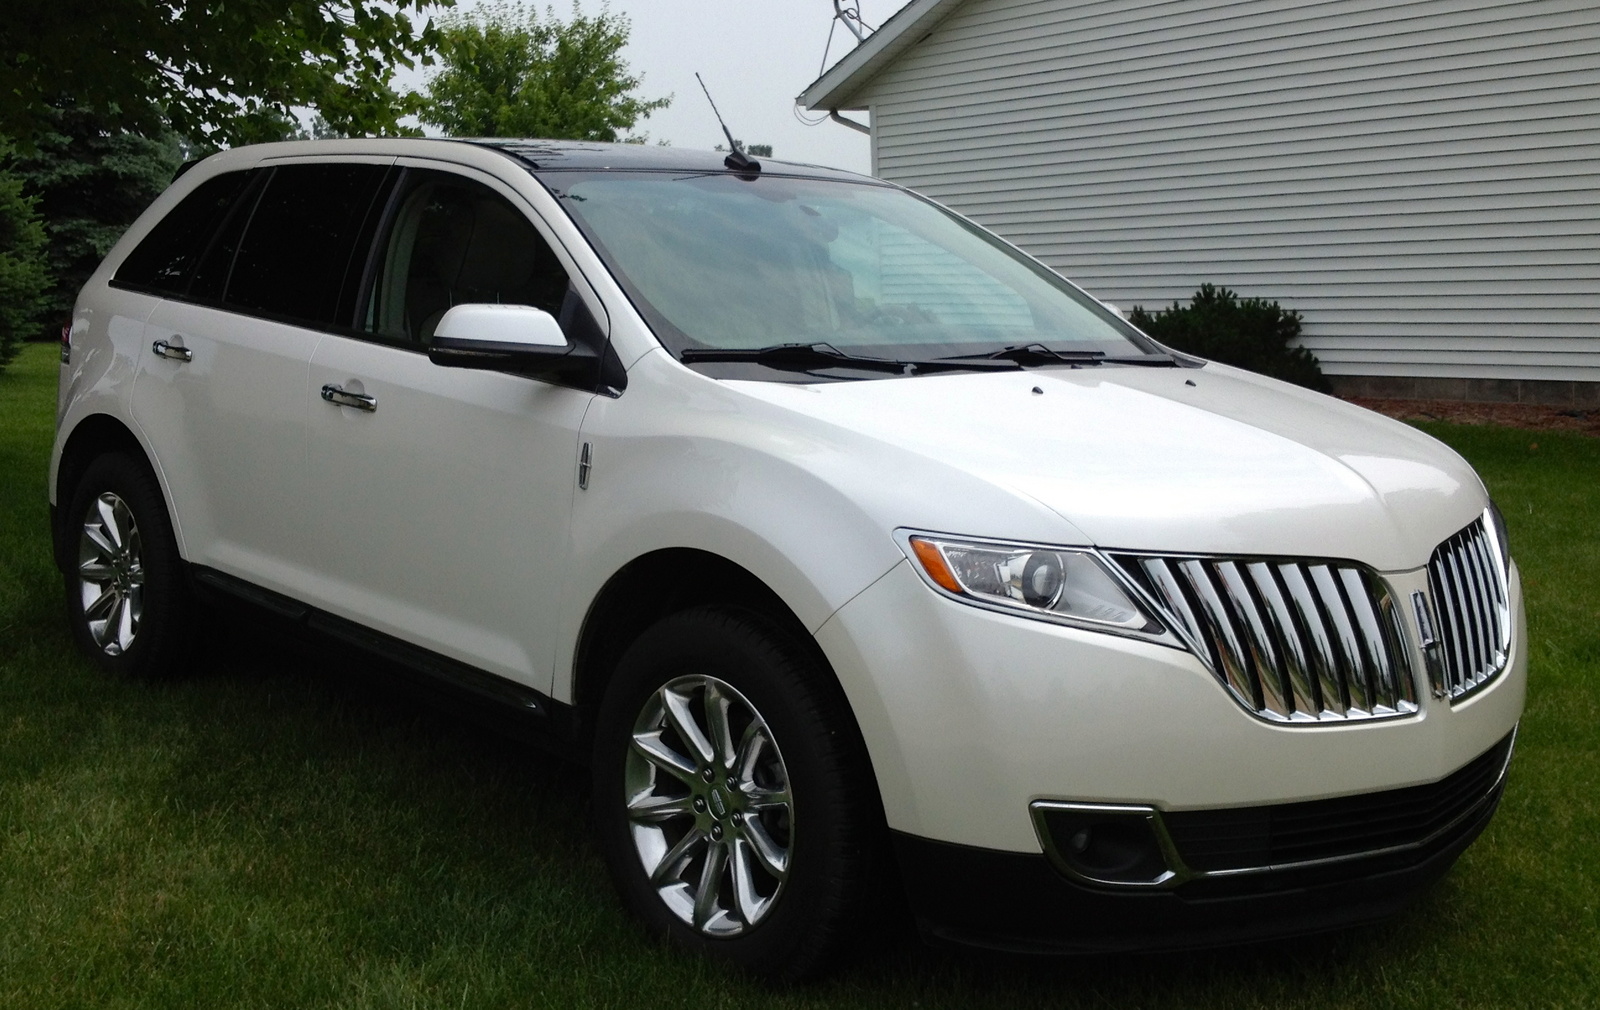 Ford lincoln mkx leasing rates canada #10